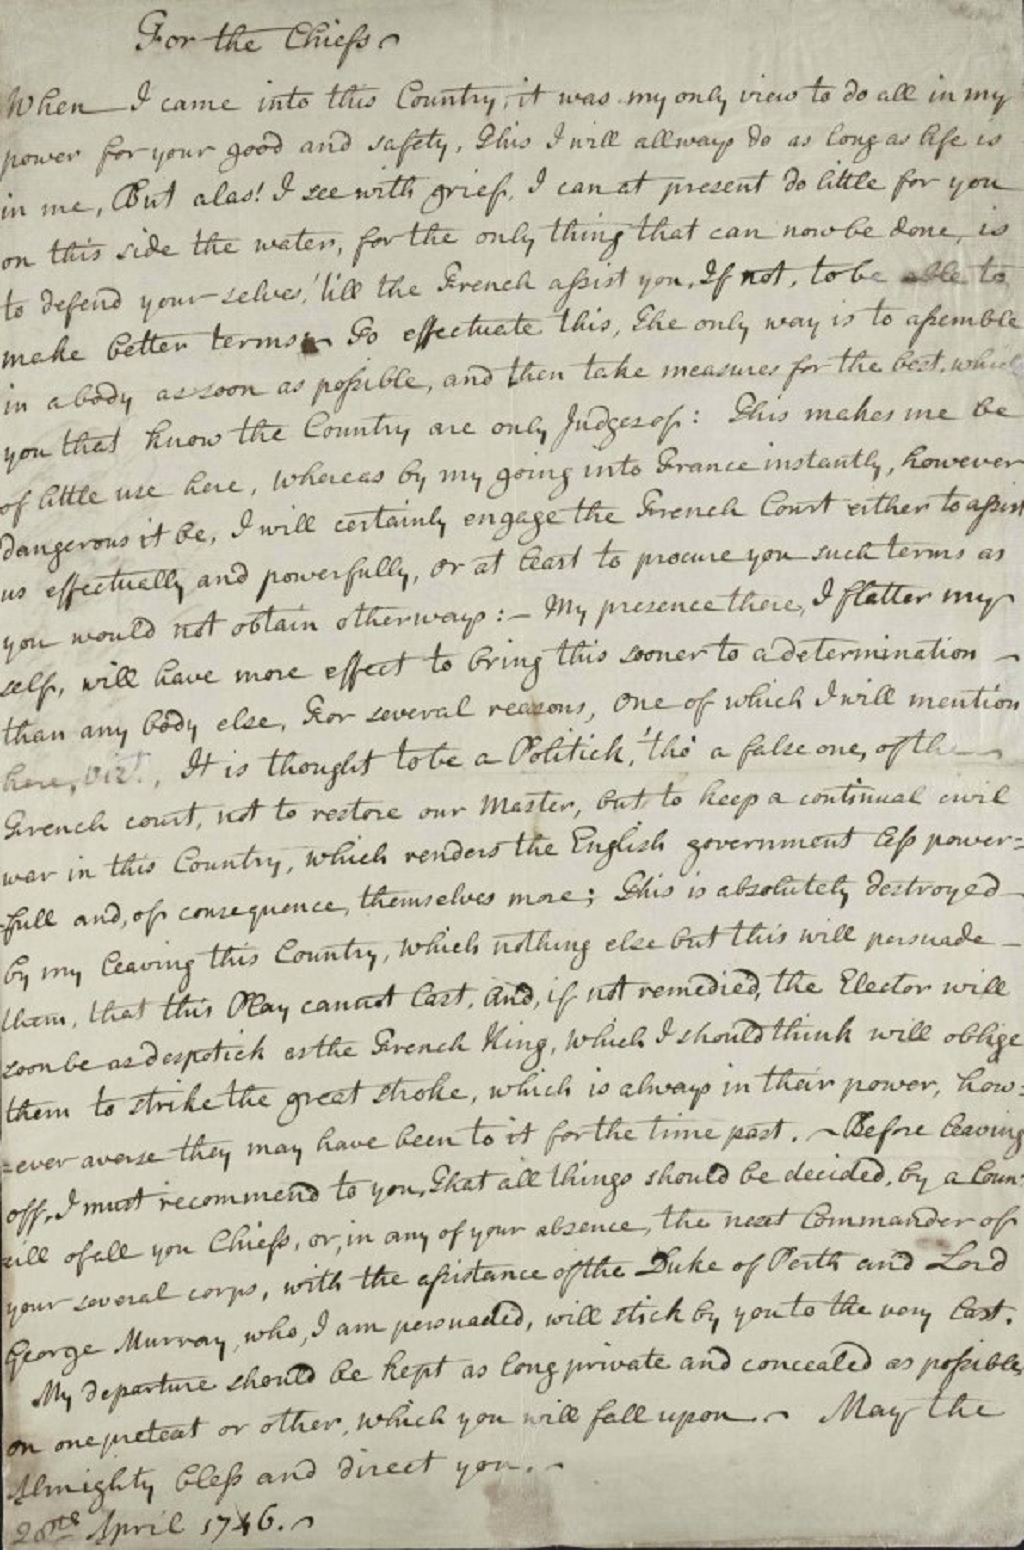 Letter from Bonnie Prince Charlie to the Scottish
Chiefs, justifying his reasons for leaving Scotland
after the Battle of Culloden, 28 April 1746
(Photo: Royal Archives / © Her Majesty
Queen Elizabeth II 2018)